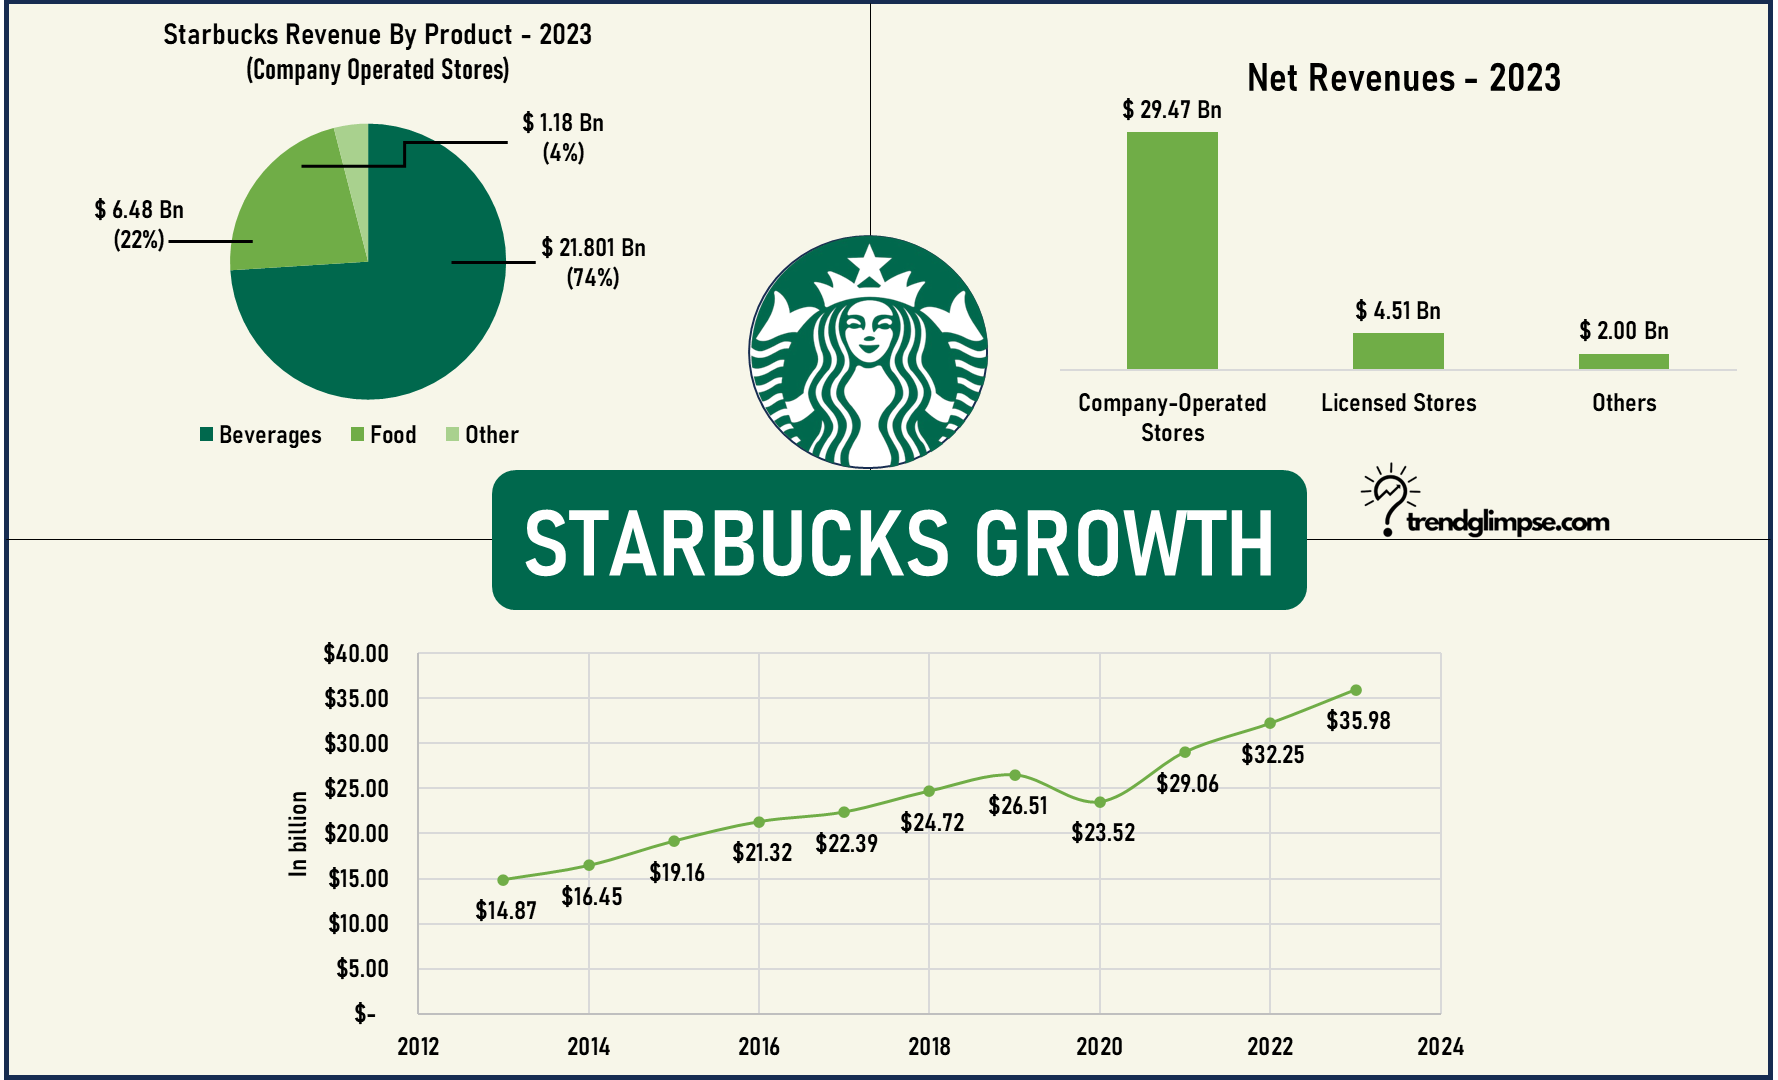 Starbucks Competitors and Alternatives in 2023